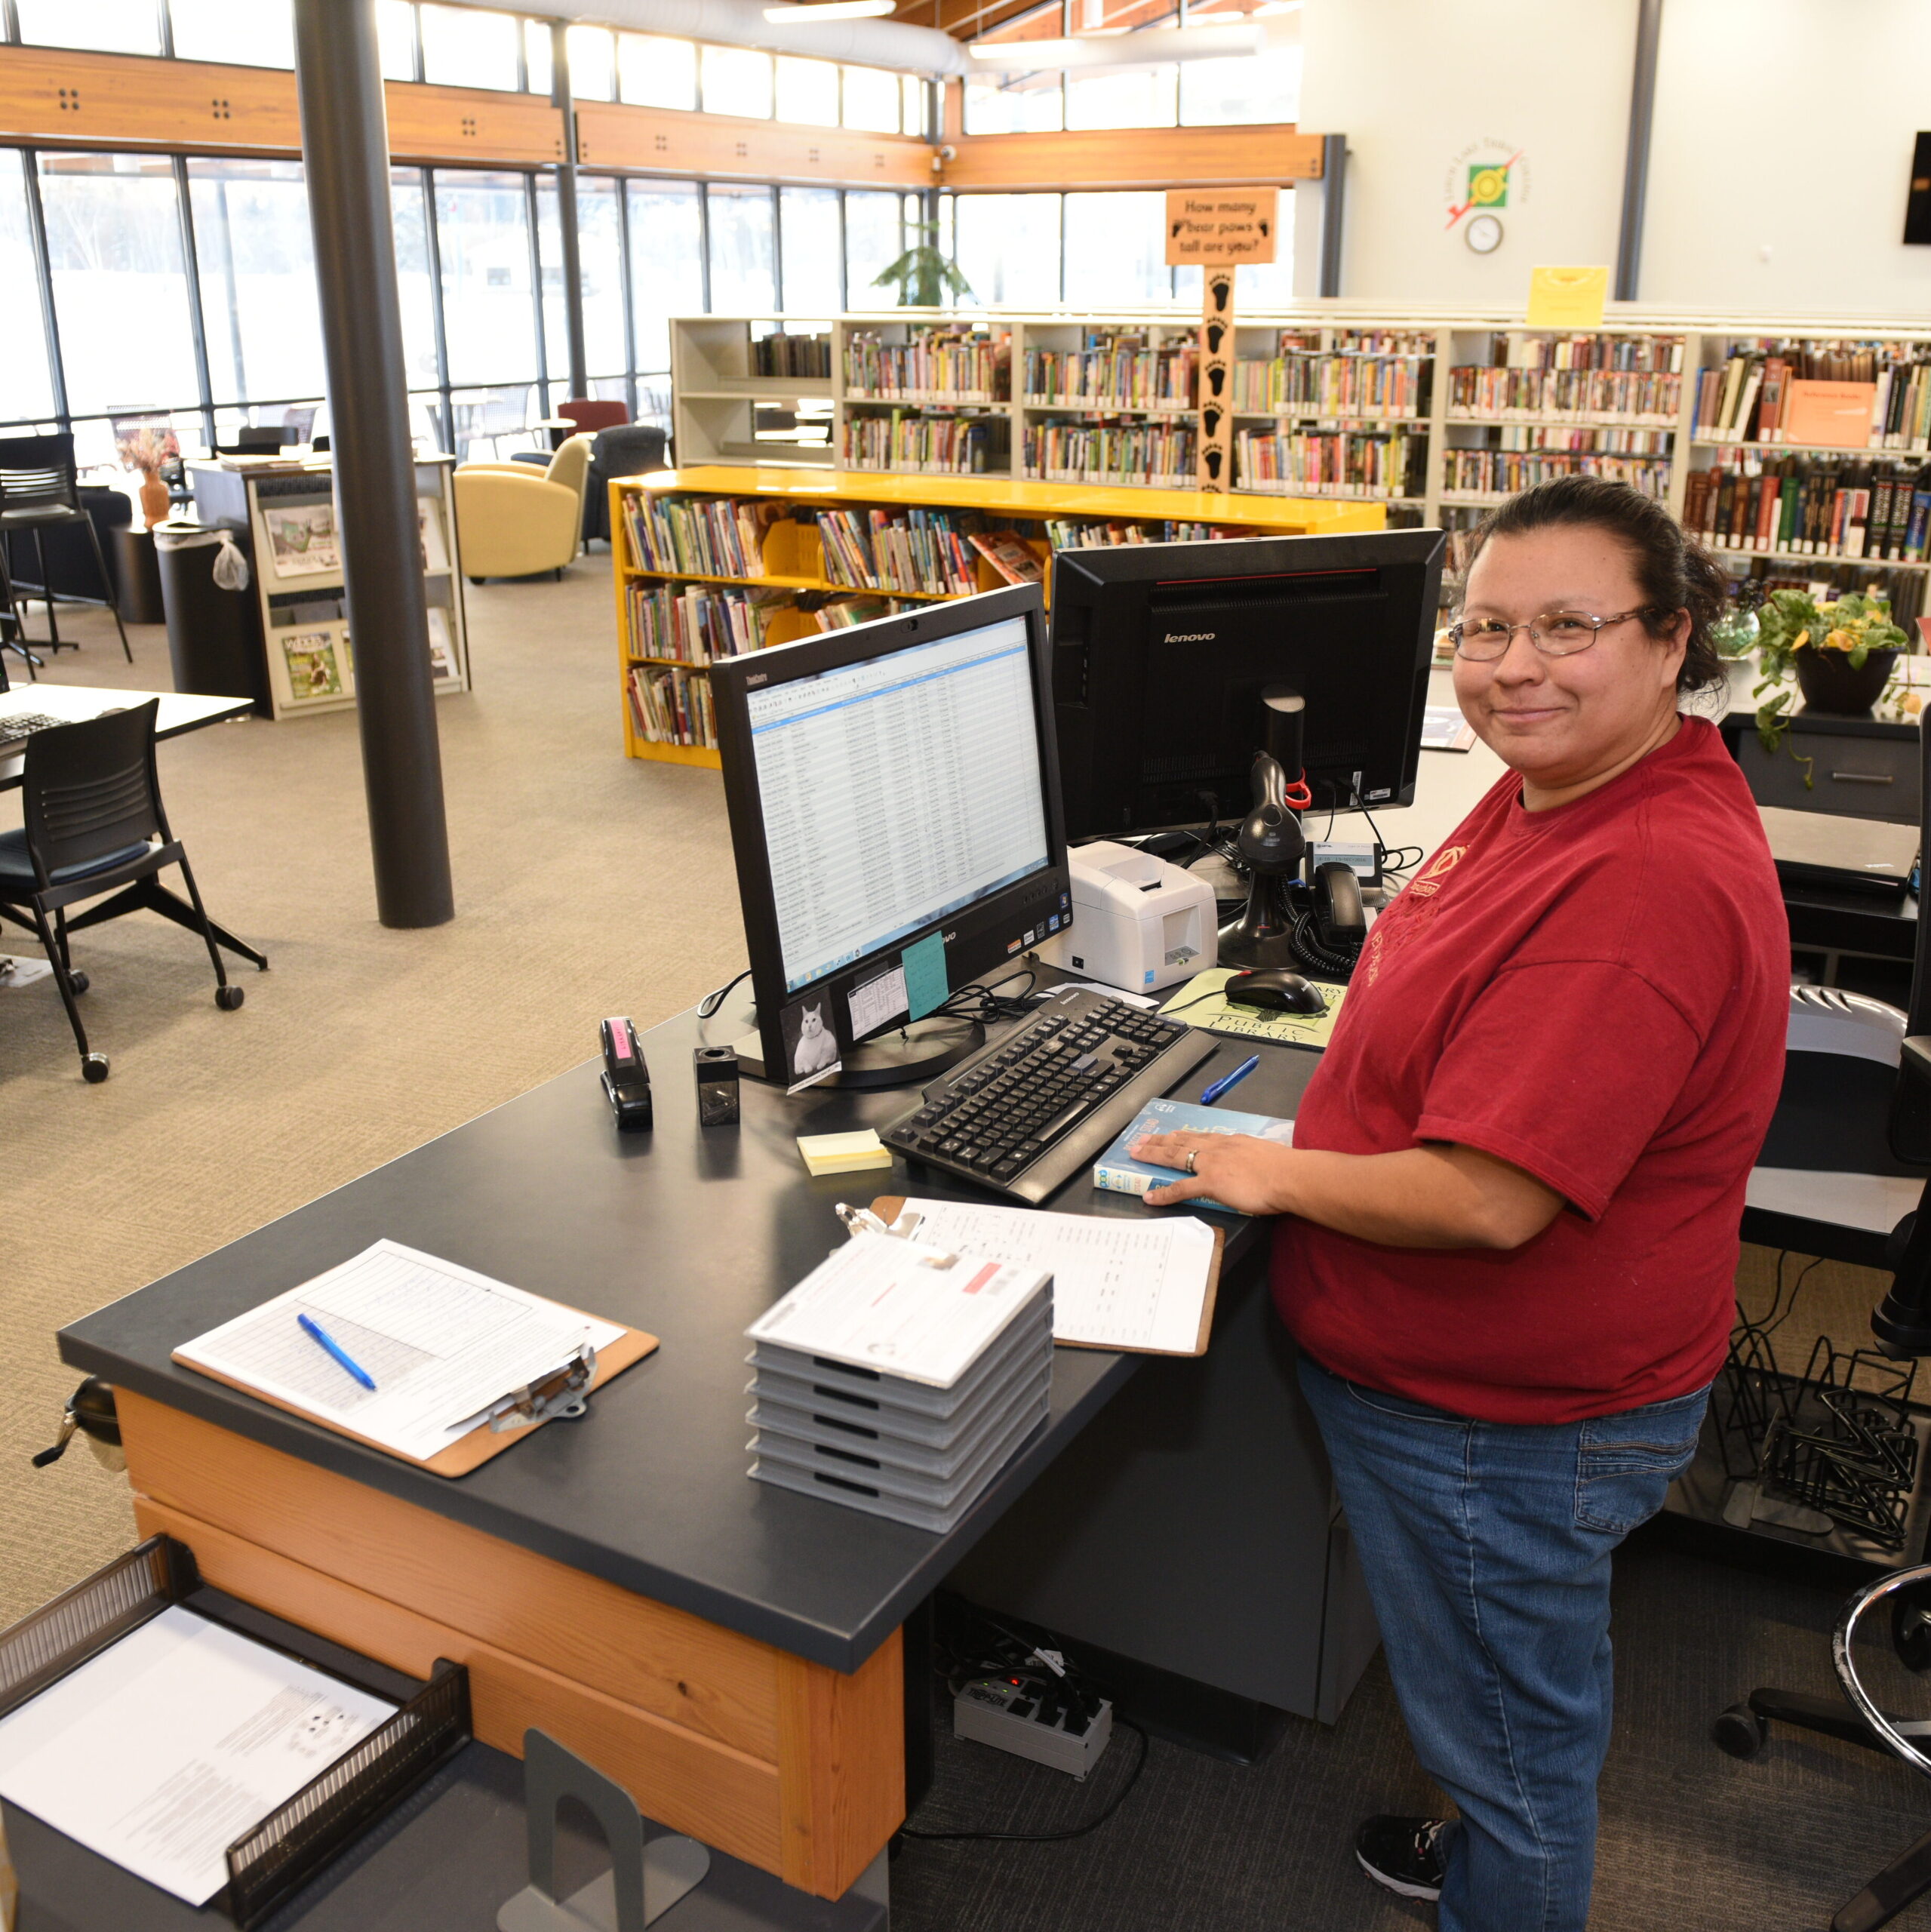 A library worker at an information desk near bookcases and computers